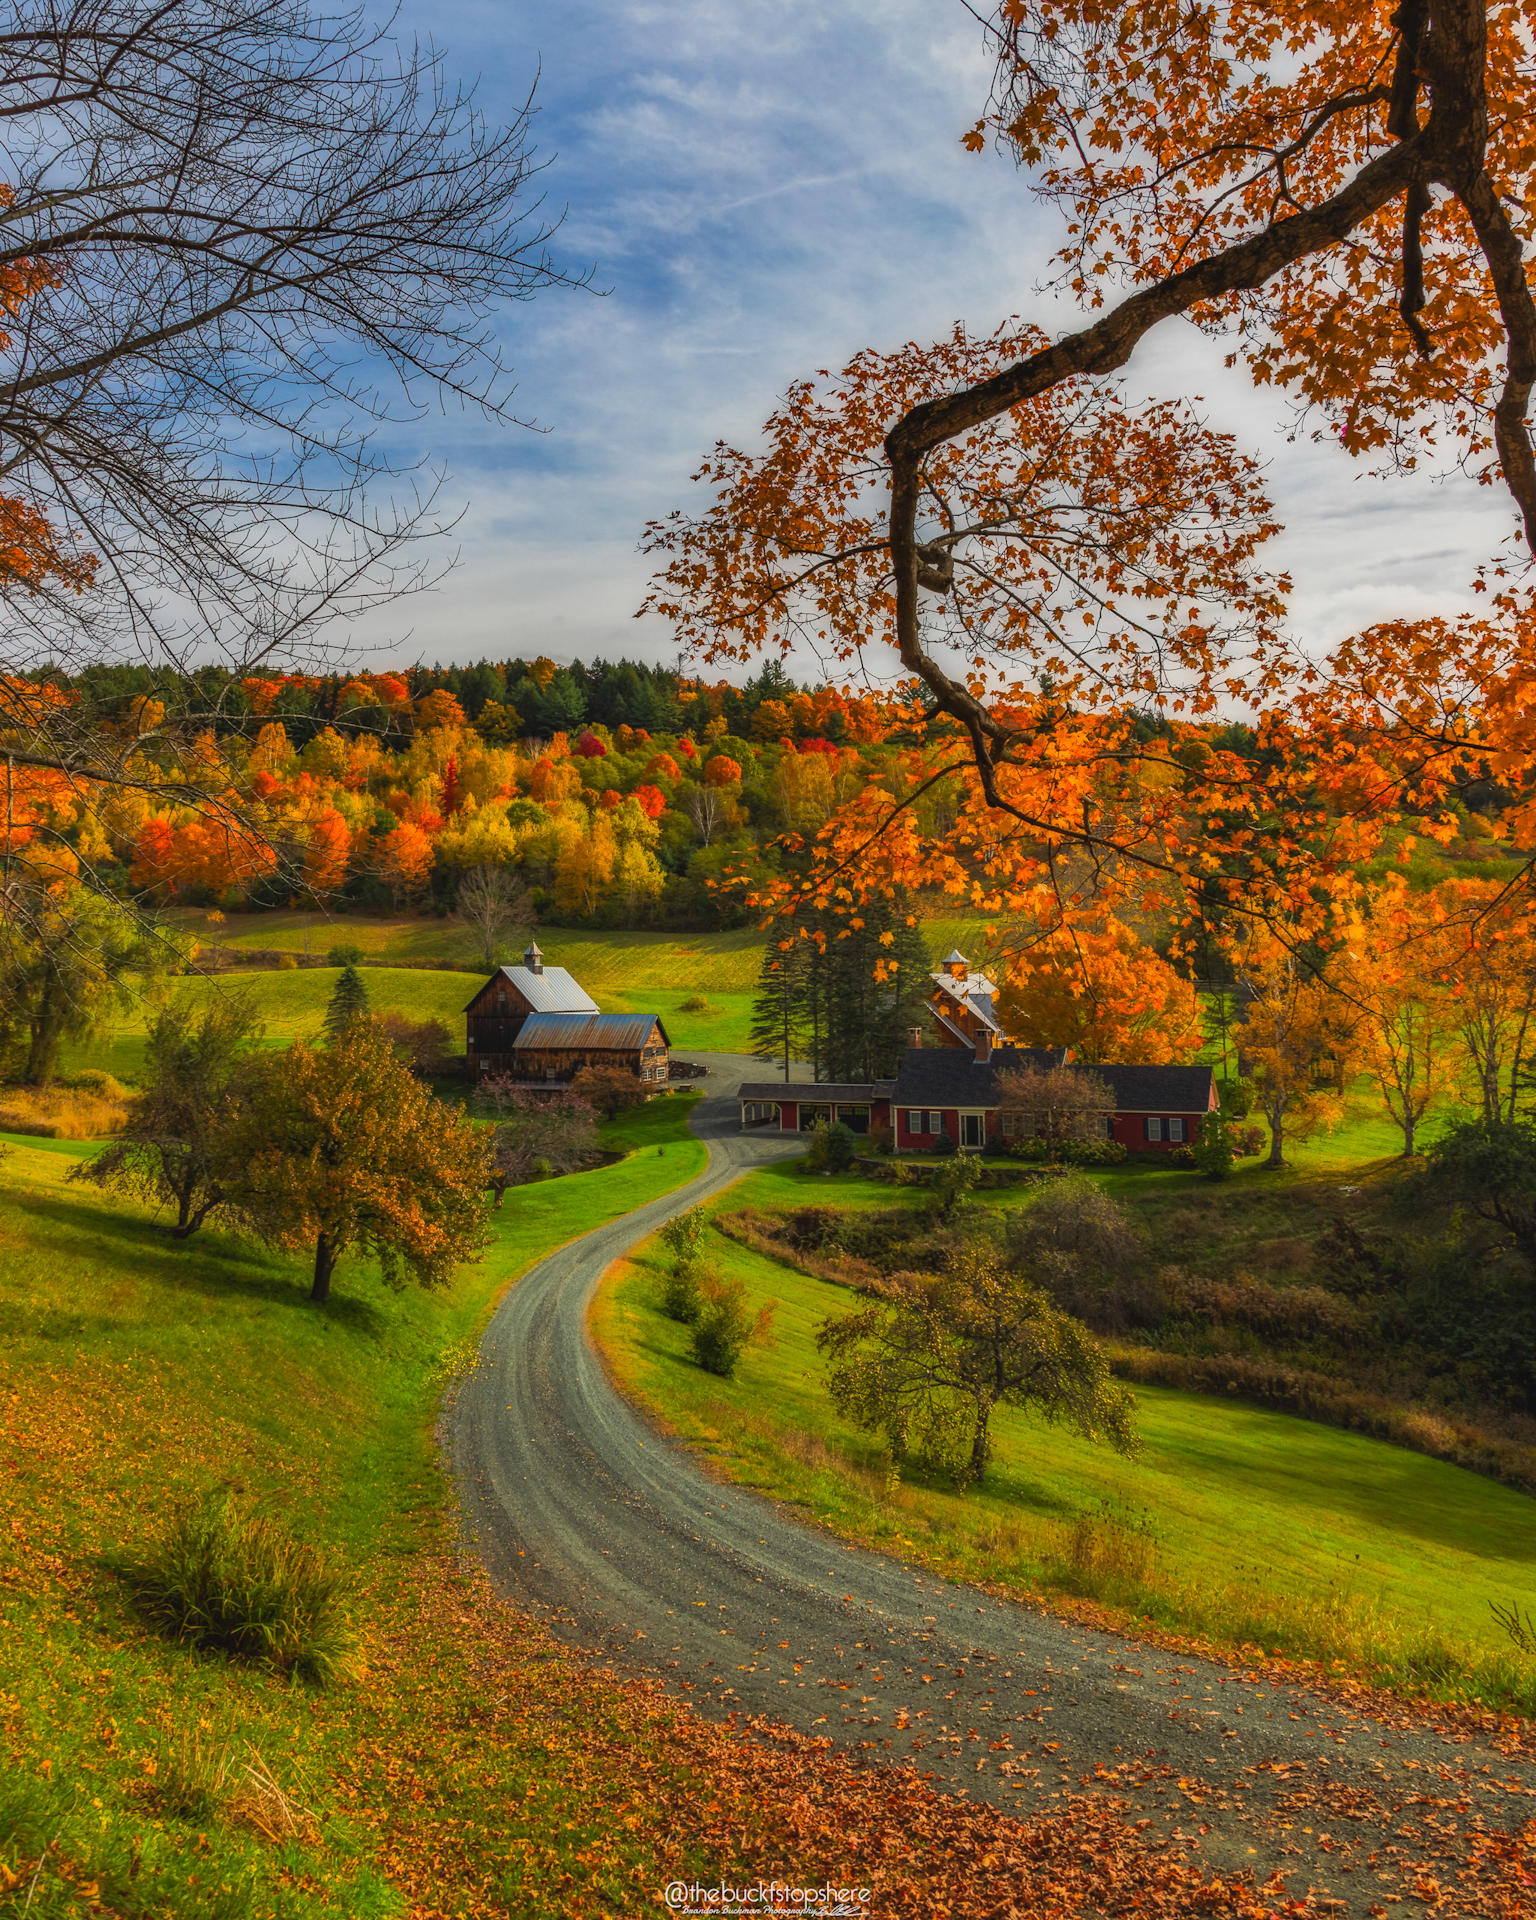 How to Set Realistic Expectations When Starting Out in Photography | How to start a photography business by popular New England photographer, Shannon Shipman: image of a New England farm surrounded trees with changing fall leaves. 